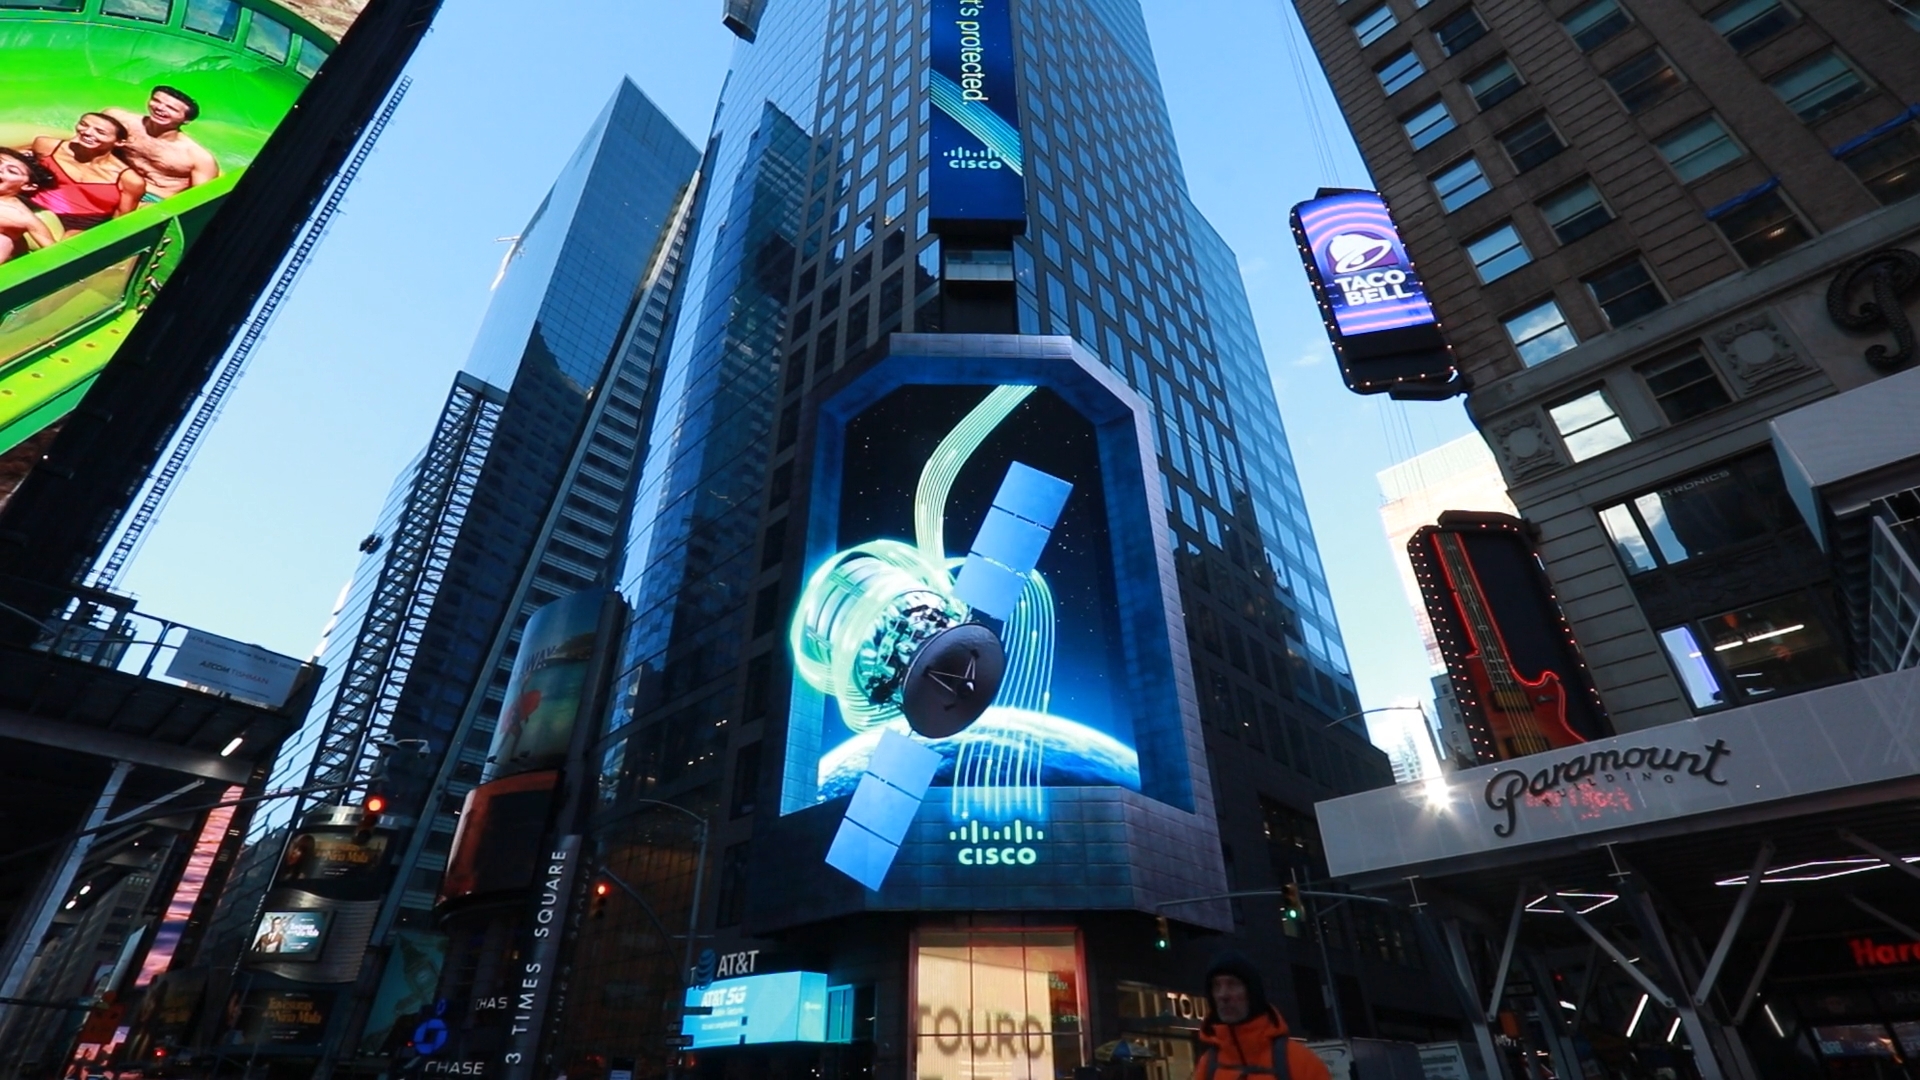 Digital billboards light up Times Square with colorful advertisements on towering skyscrapers. Prominent among them is a large screen showcasing a Cisco ad featuring a satellite in space. Various other ads including Taco Bell and Paramount are also visible.